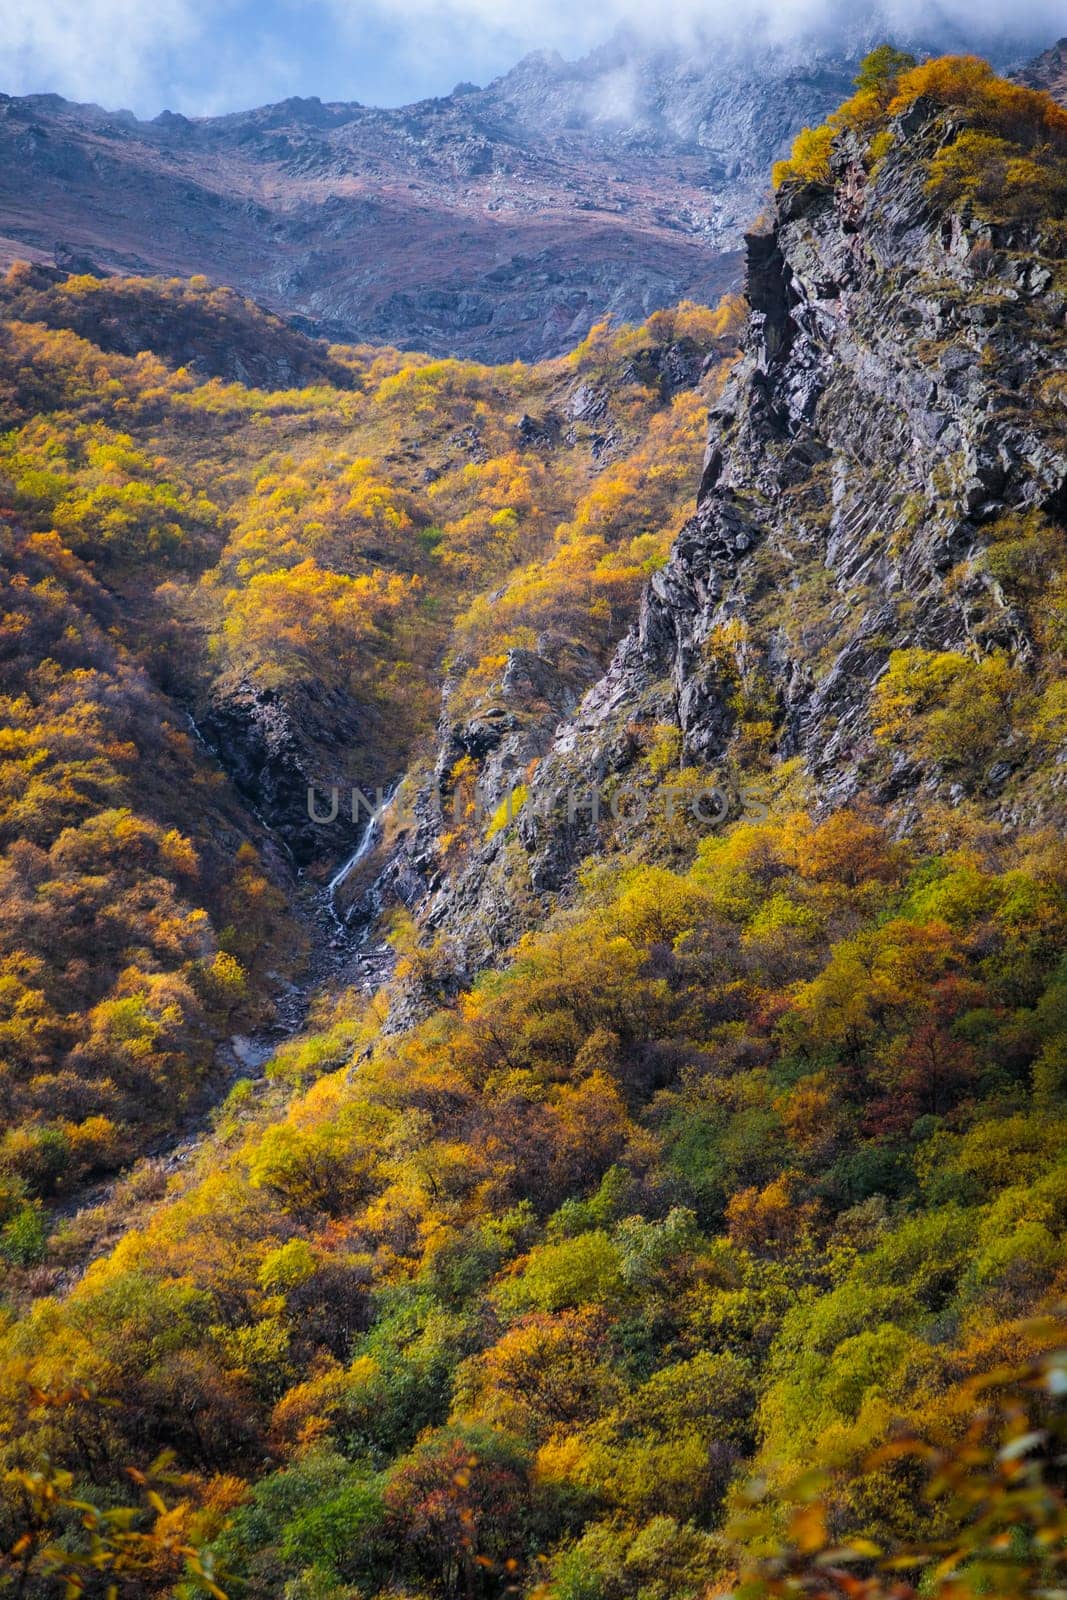 Colorful autumn transforms the mountain world, creating breathtaking landscapes